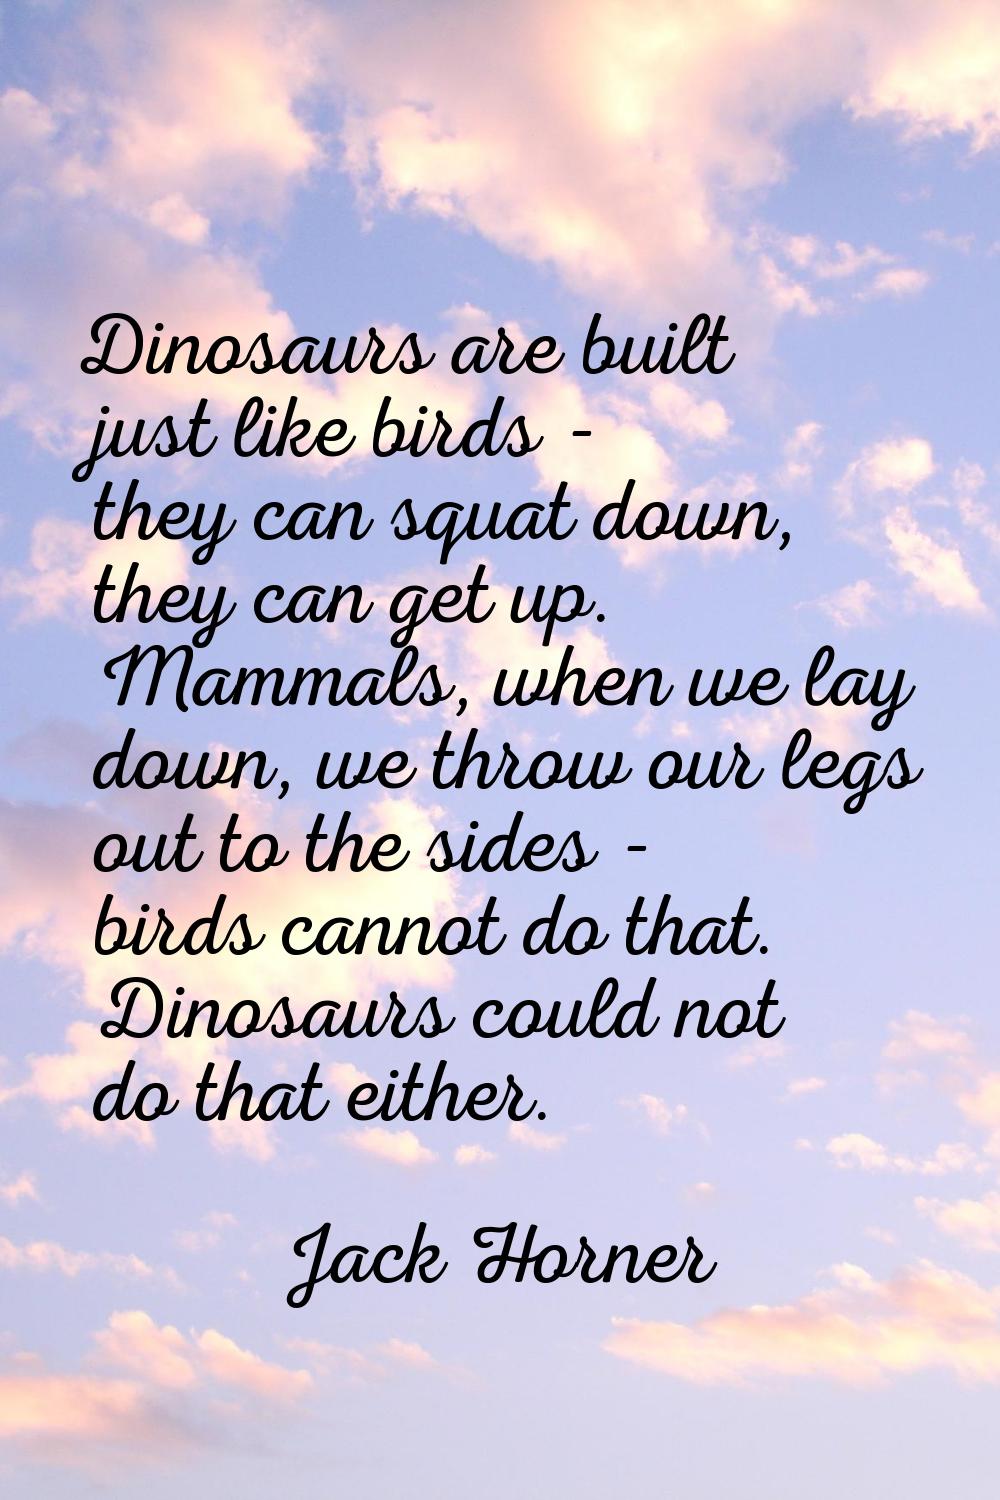 Dinosaurs are built just like birds - they can squat down, they can get up. Mammals, when we lay do